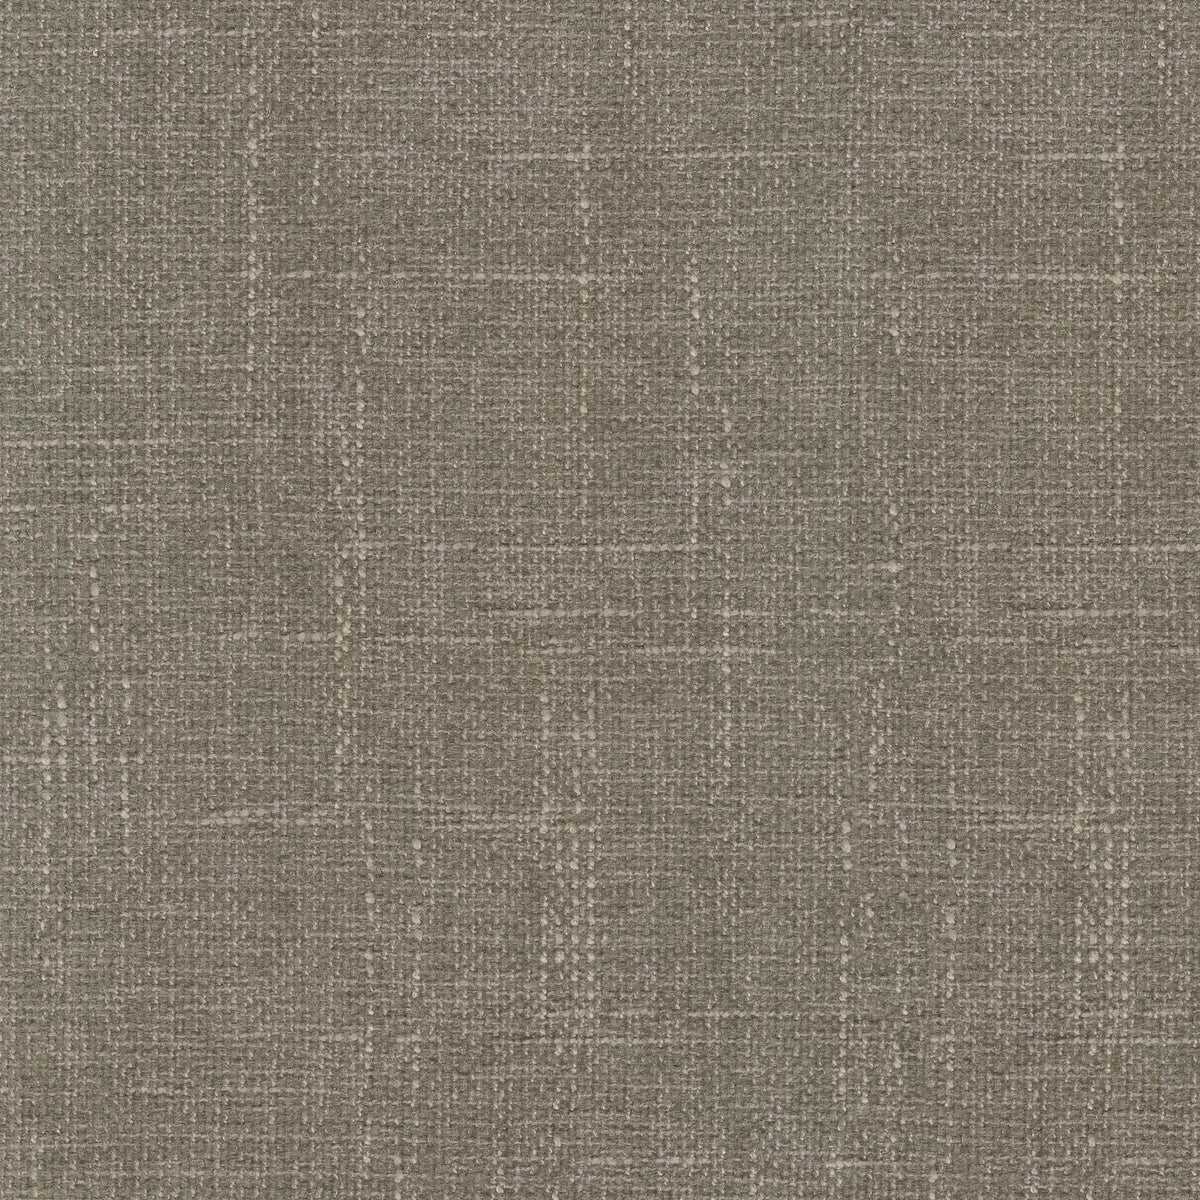 P/K Lifestyles Performance Mixology - Sterling 410833 Upholstery Fabric